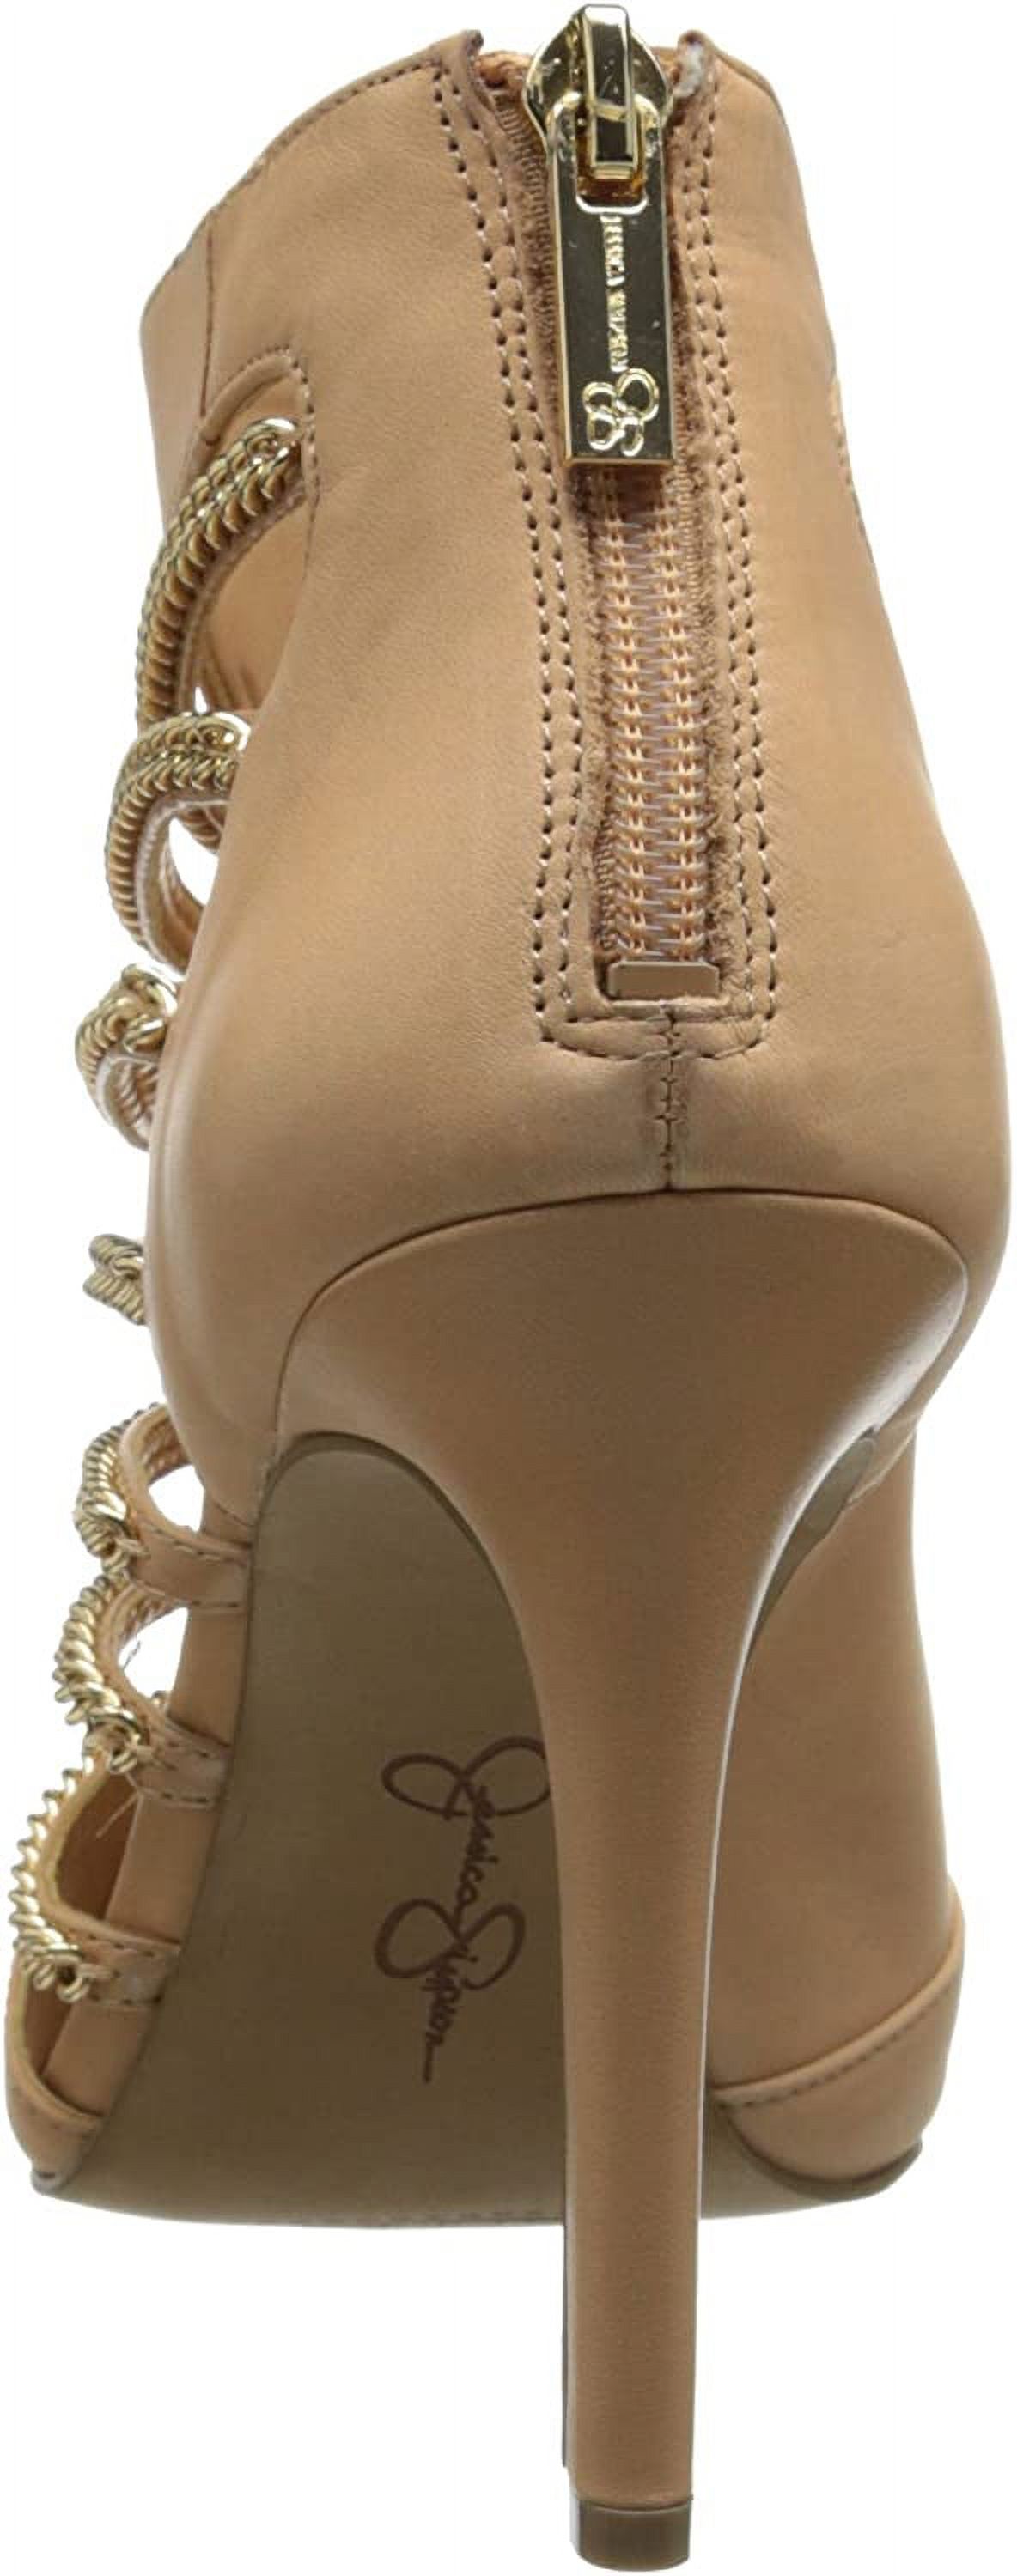 Jessica Simpson Women's Camelia High Heel Chain Cut Out Booties, Beach Sand - image 3 of 8